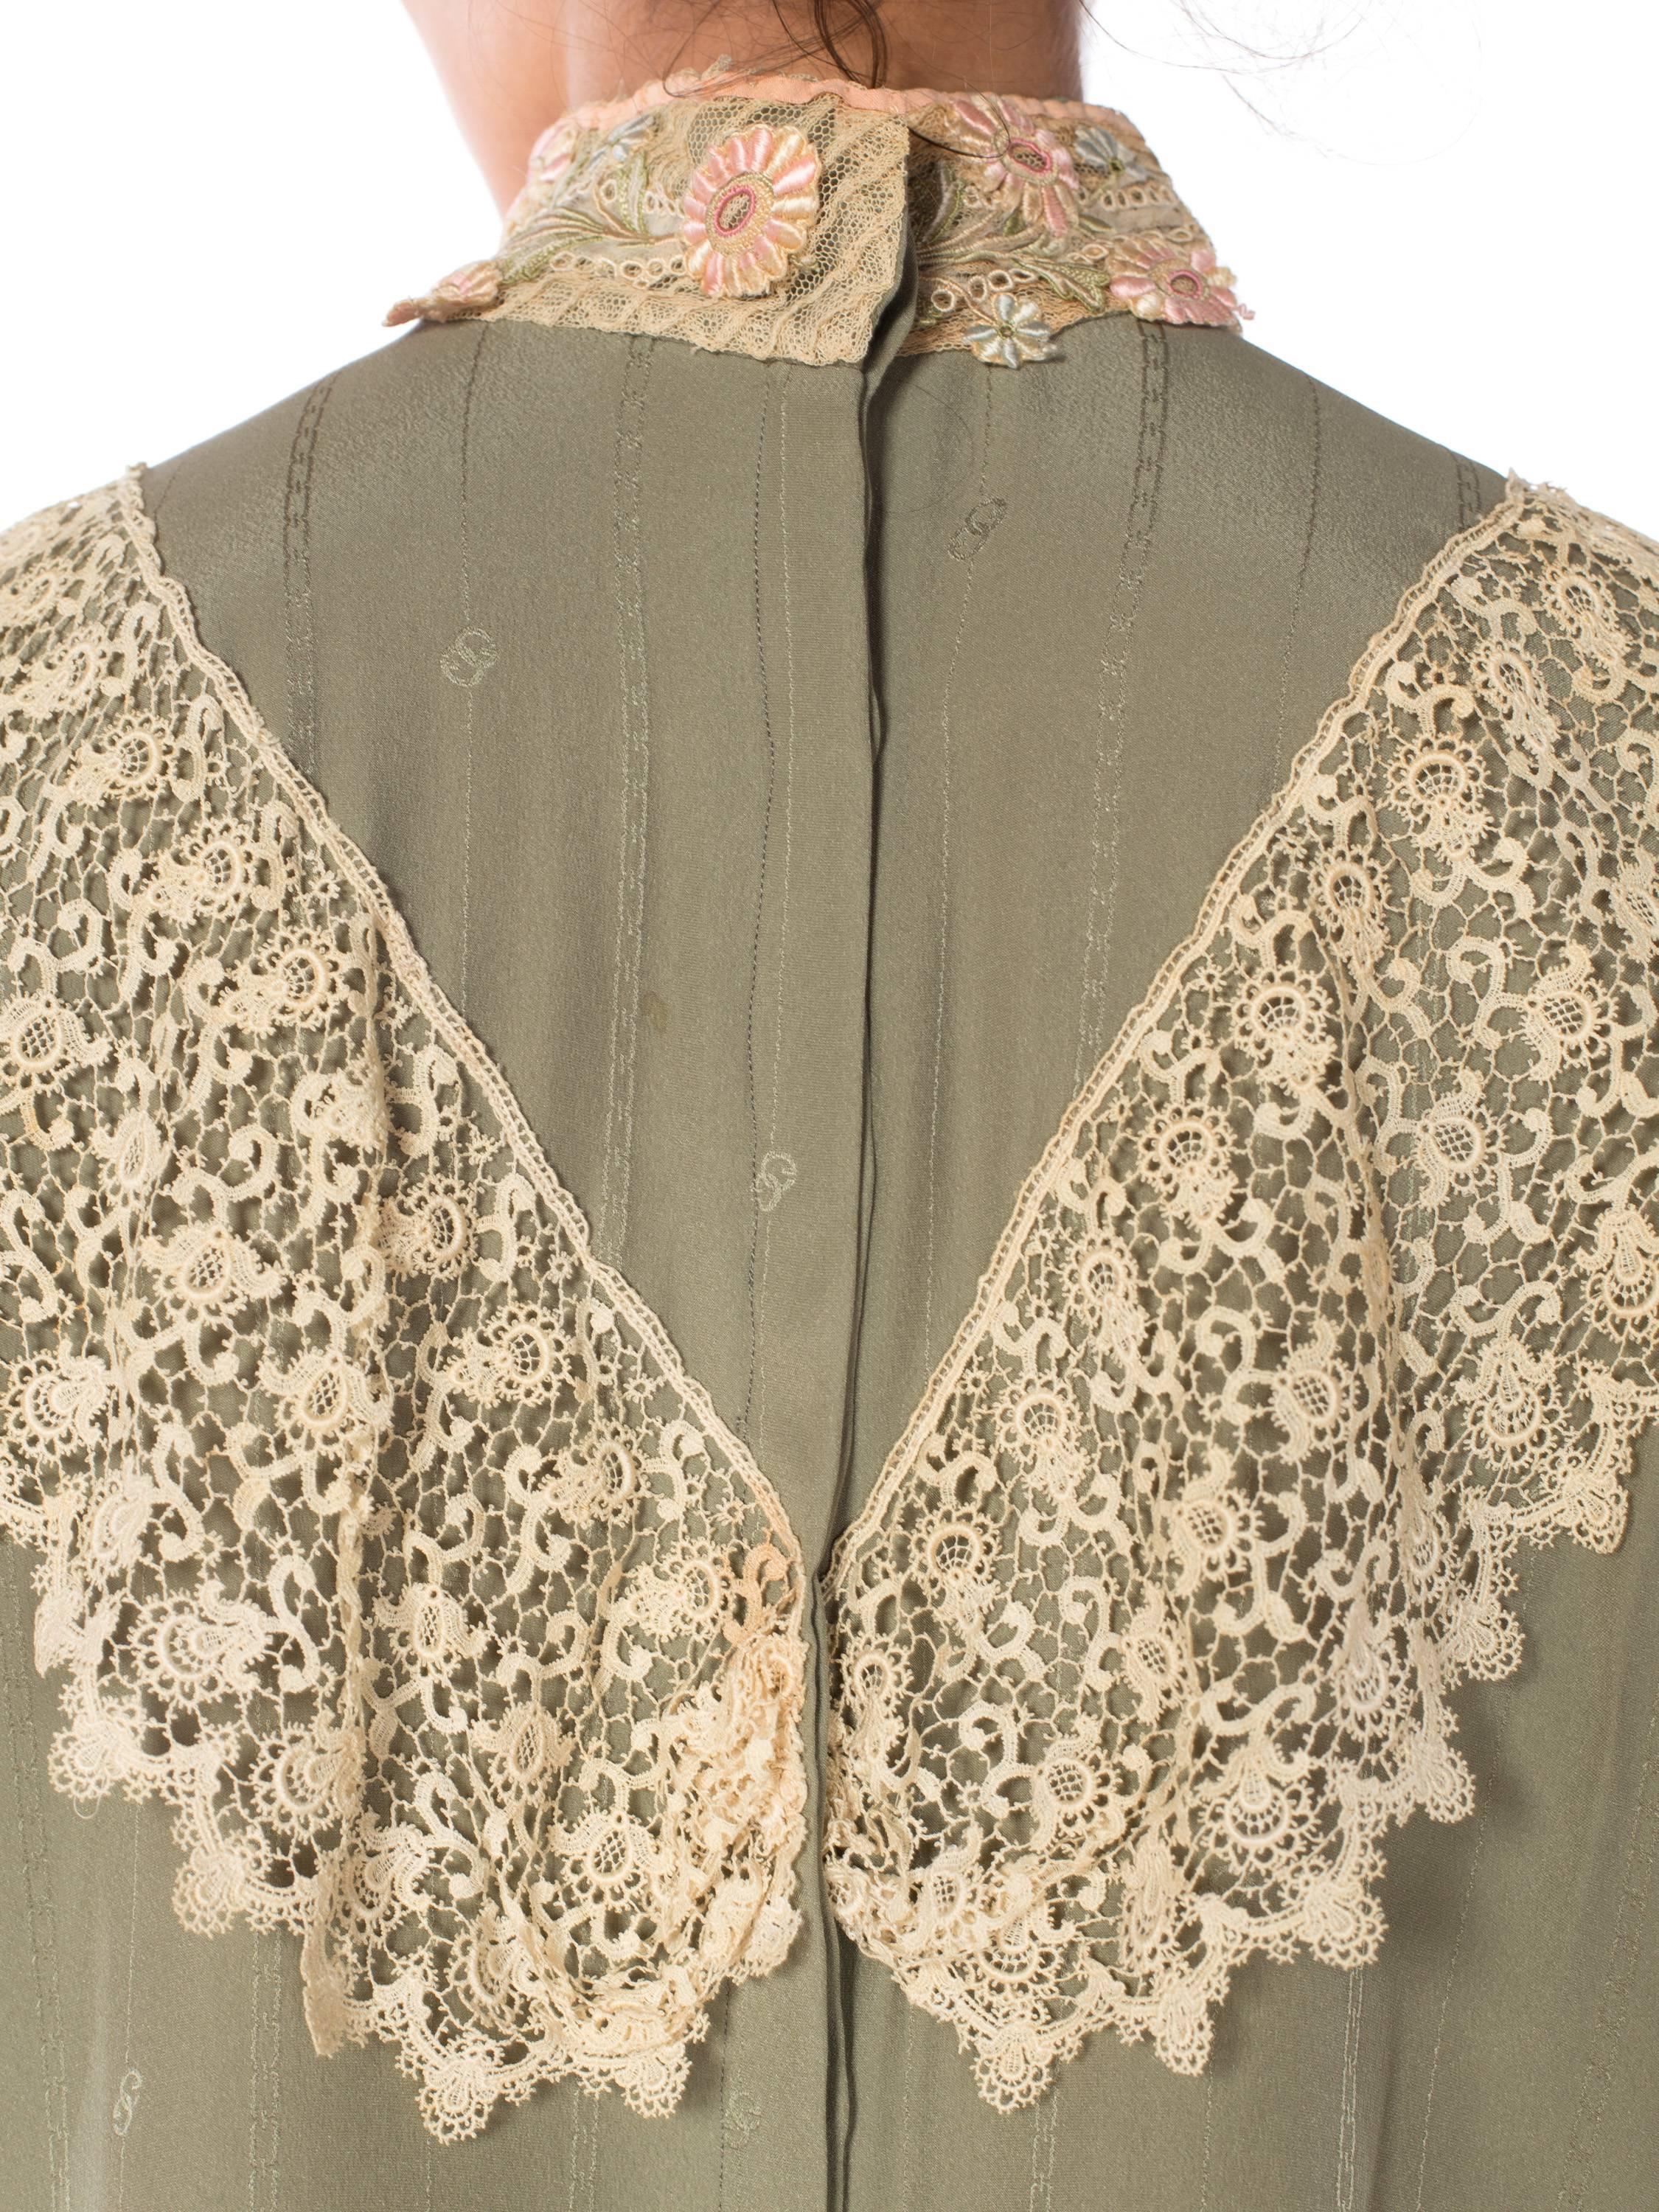 Gucci Silk Blouse with Victorian Lace Trim, 1970s  1